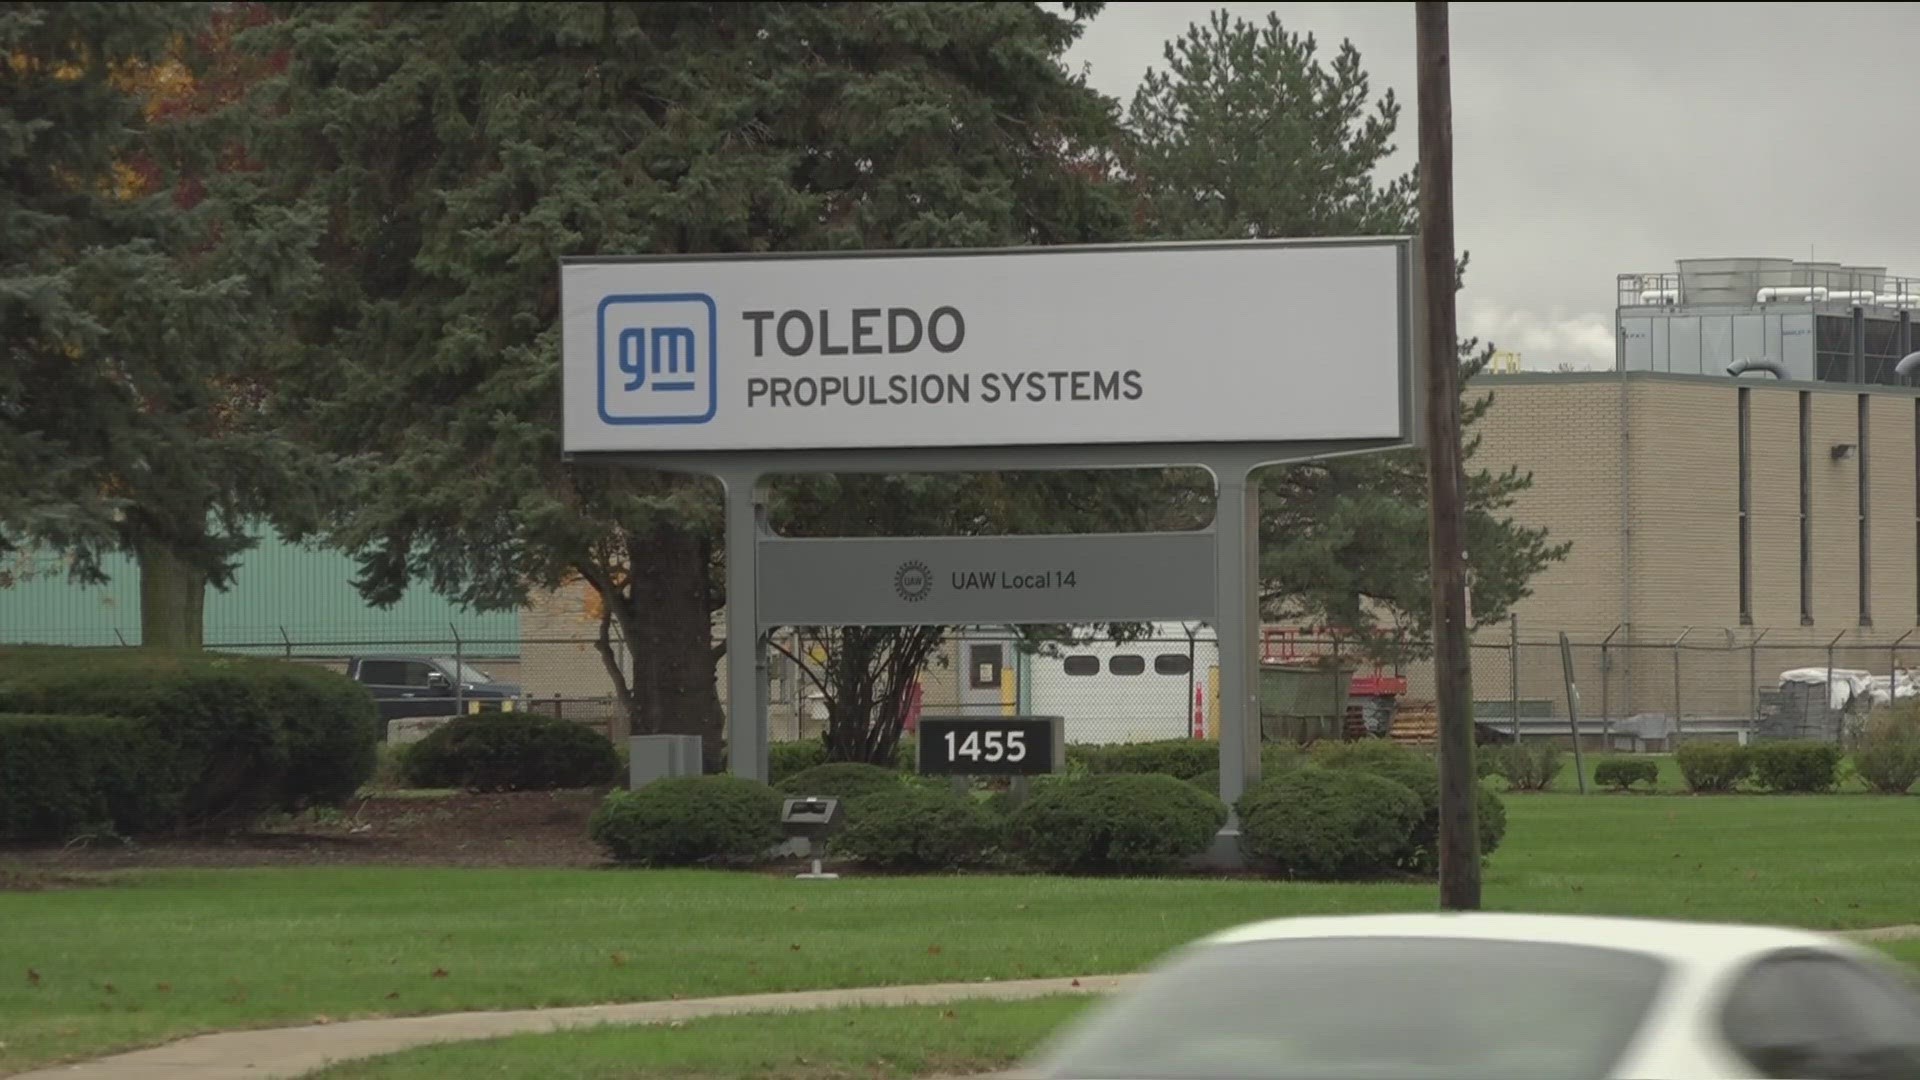 While there's still work to be done in finalizing any offer, the announced tentative deal has people in Toledo believing this 41-day strike is coming to an end.